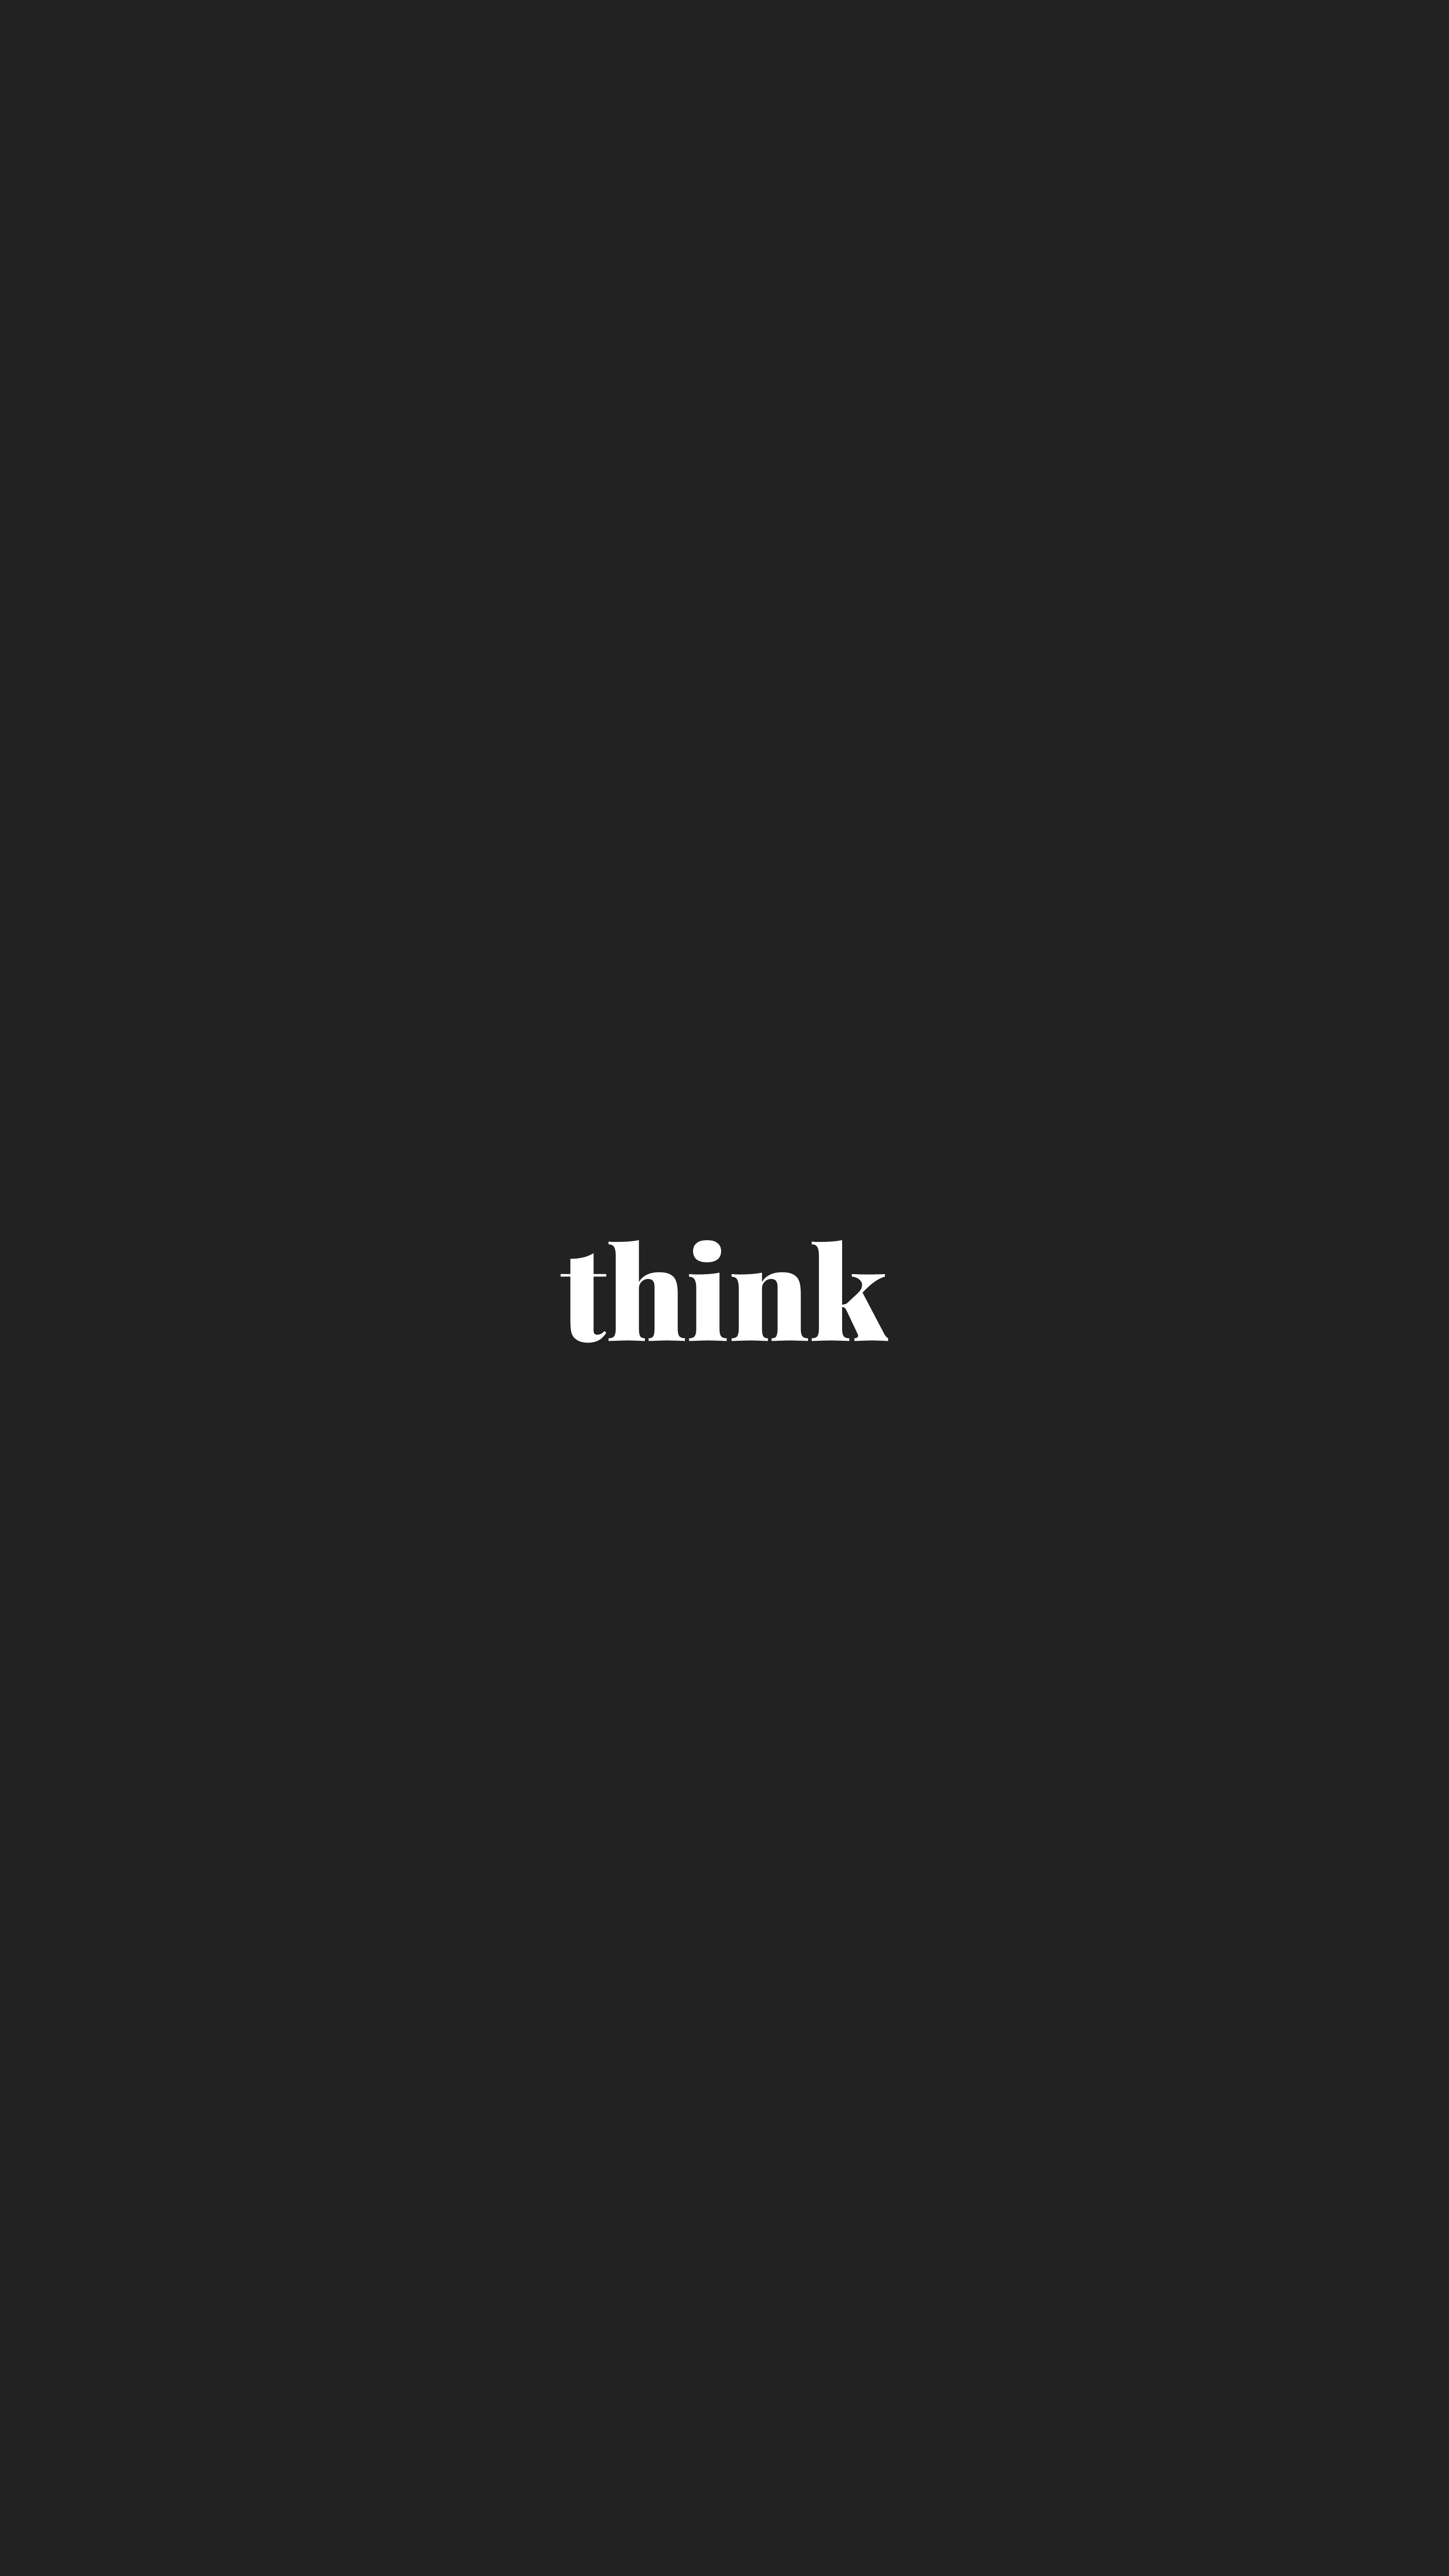 Mobile Wallpaper: Free HD Download [HQ] word, minimalism, think, words